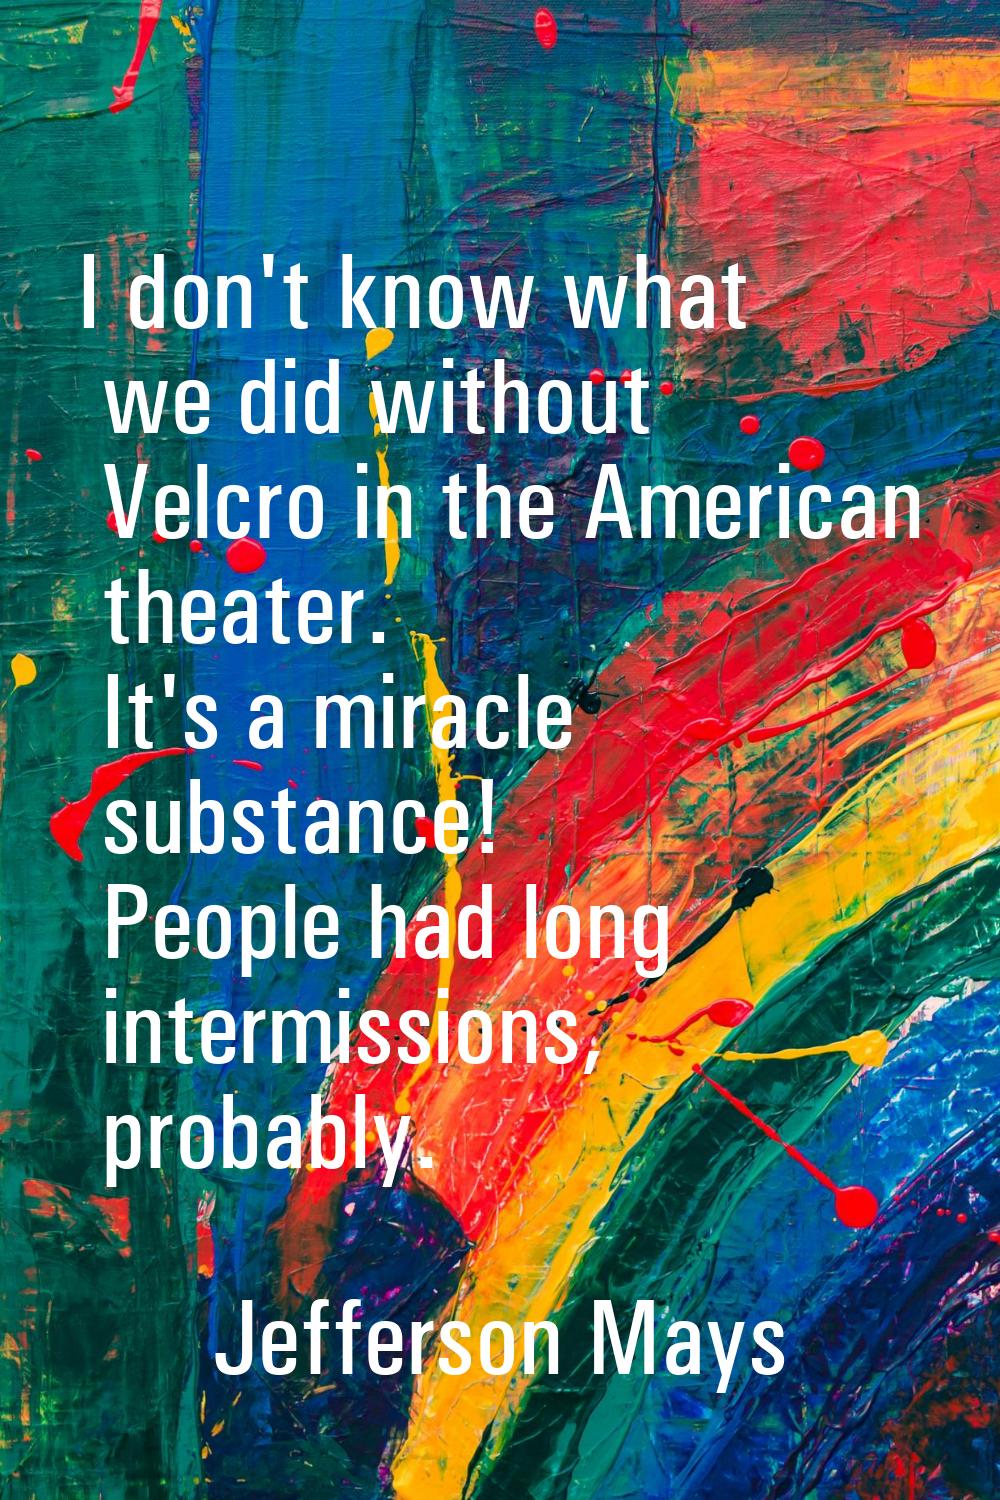 I don't know what we did without Velcro in the American theater. It's a miracle substance! People h